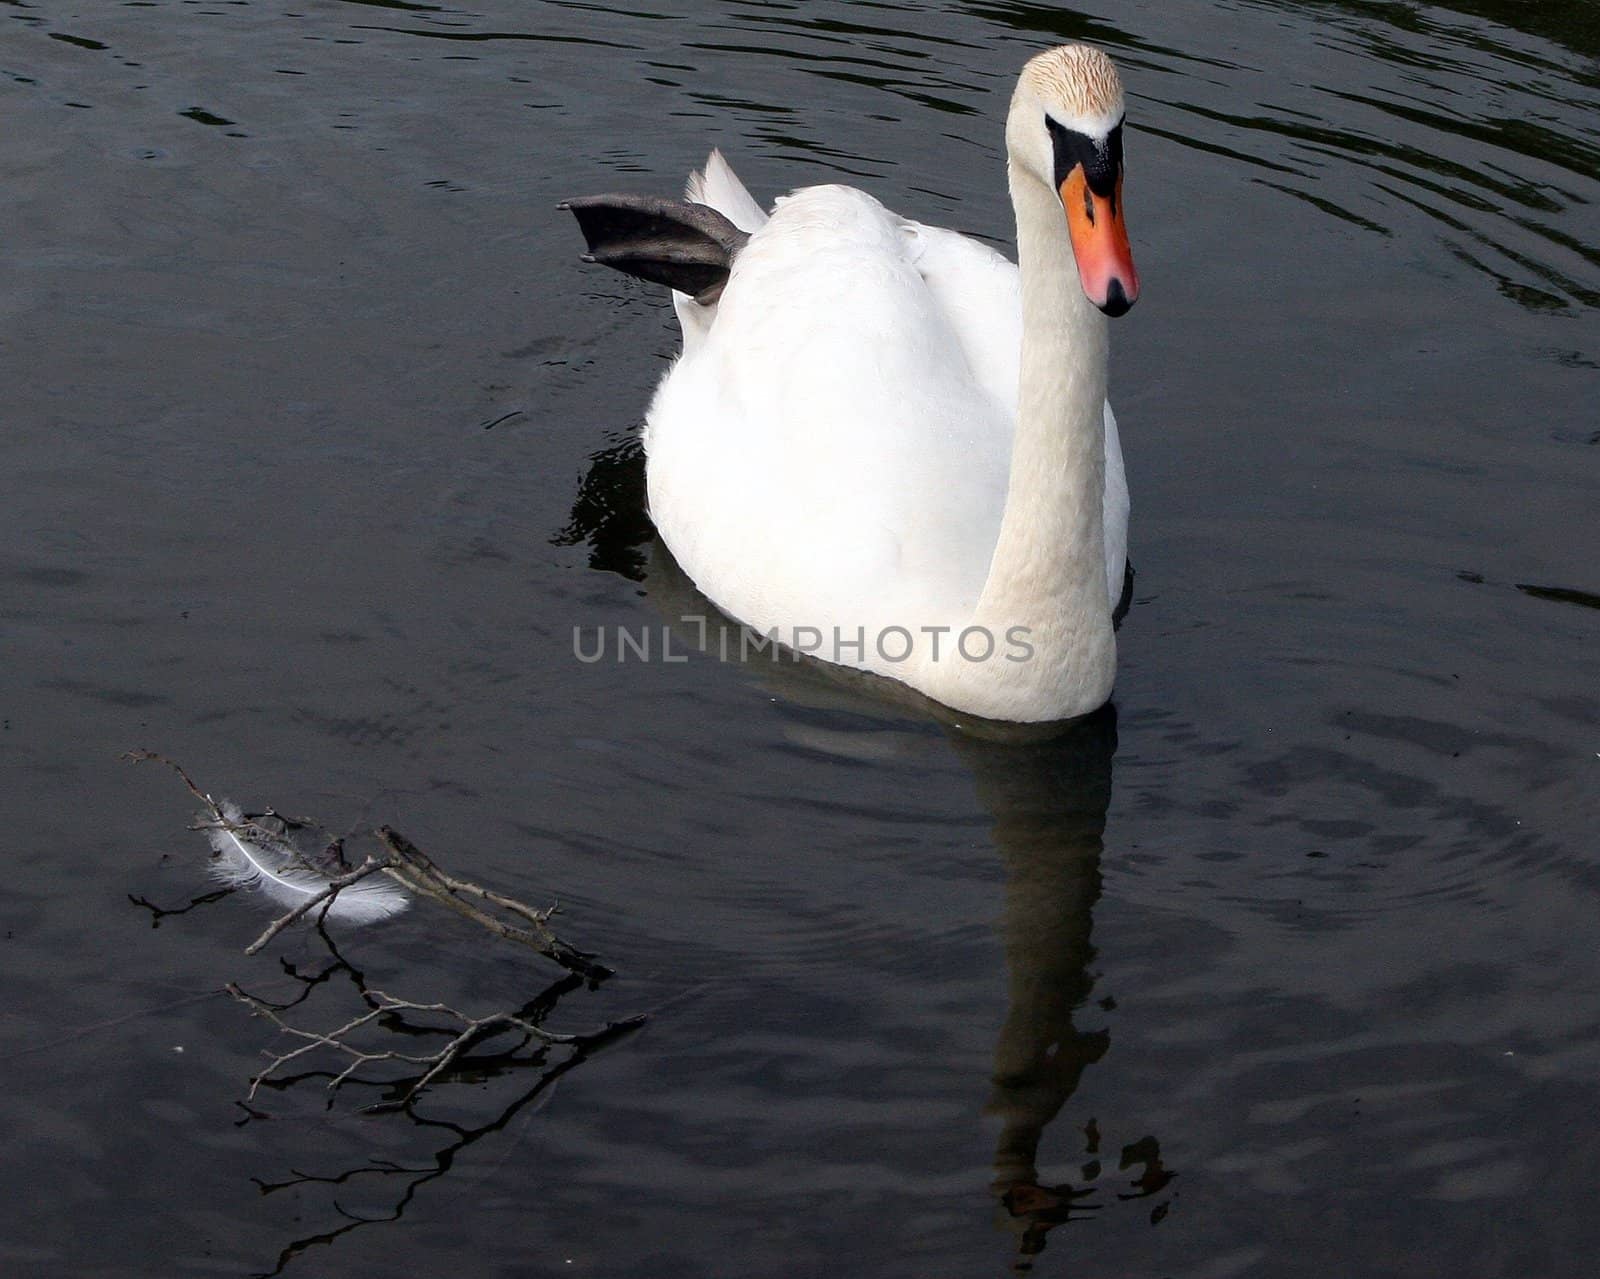 A swan and a feather in a lake.